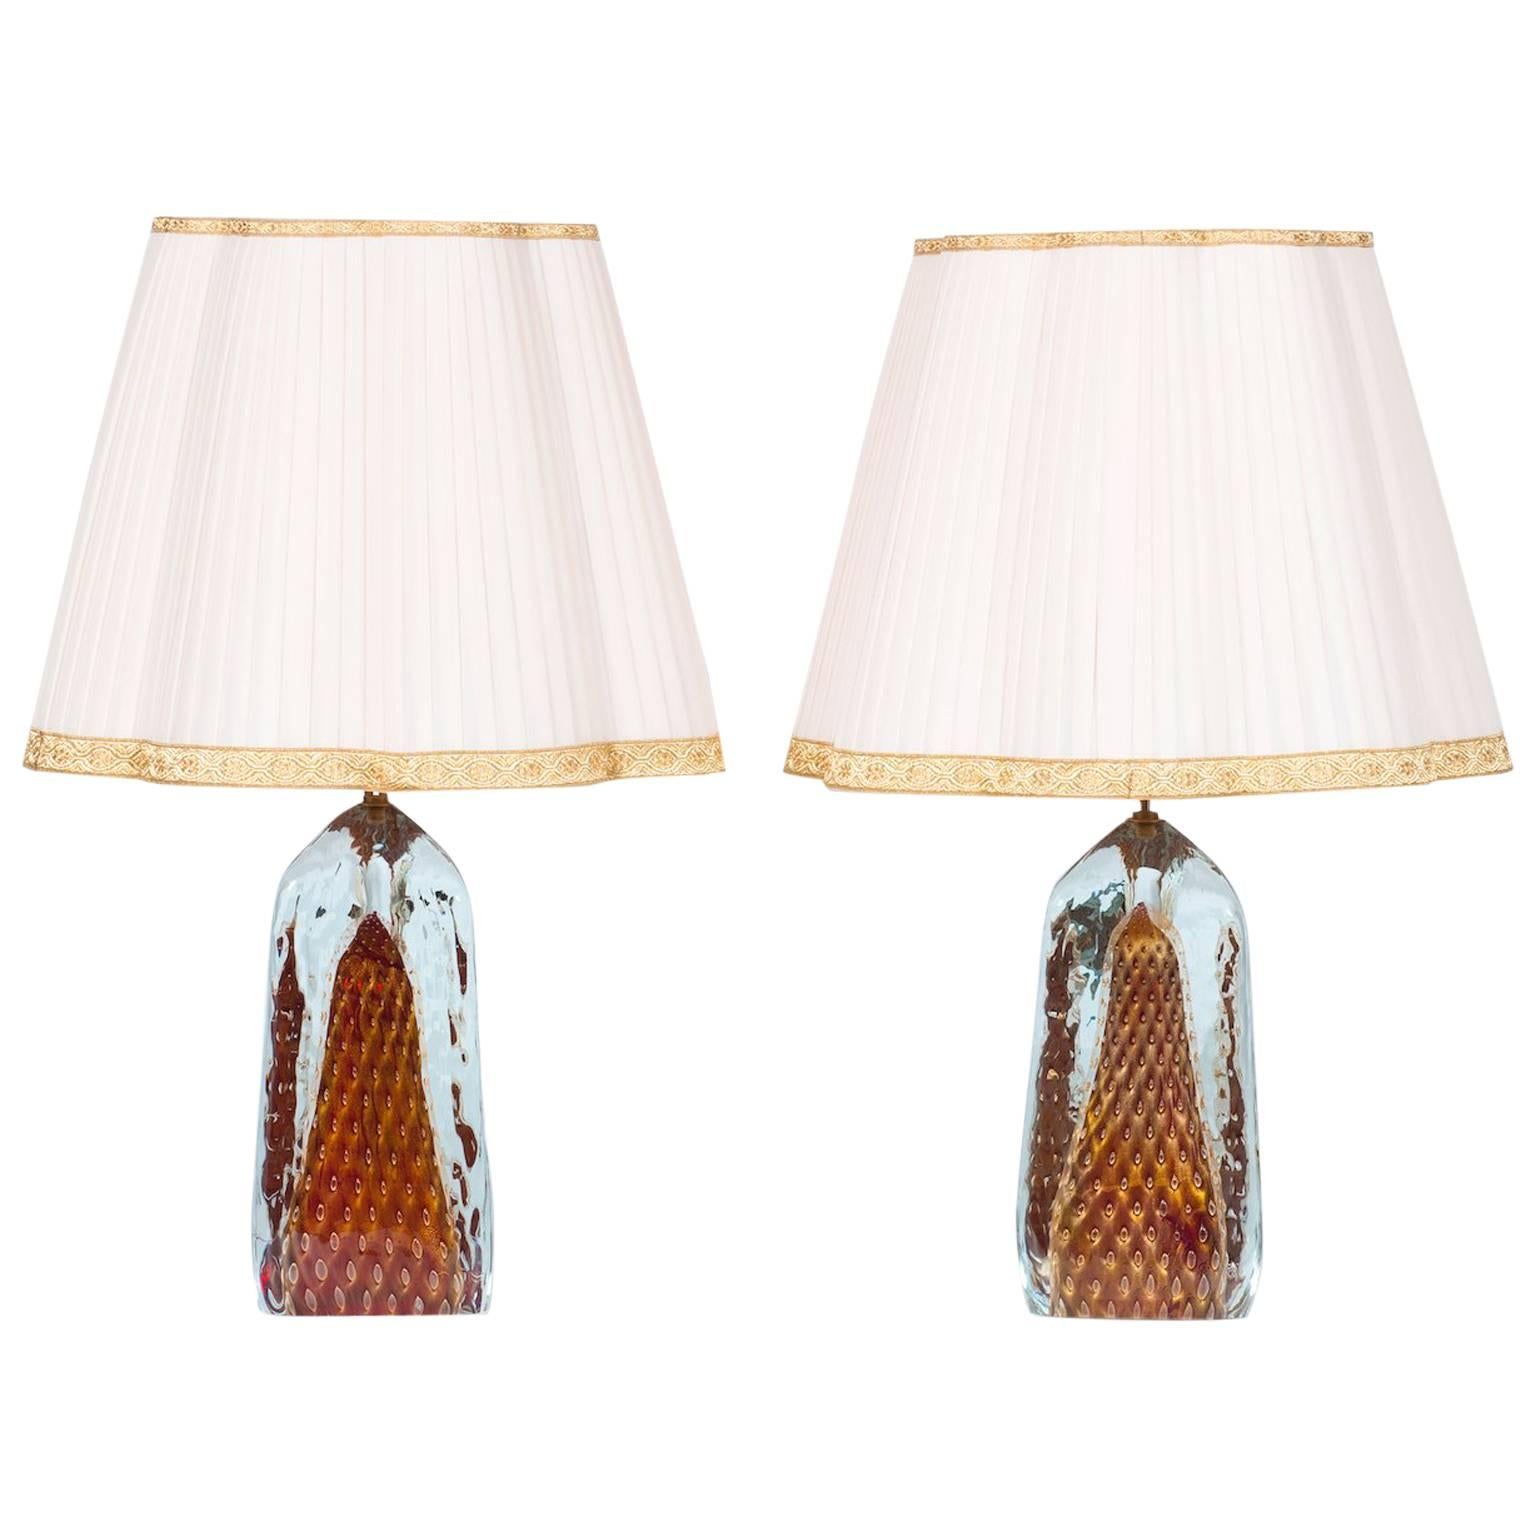 Pair of Italian Table Lamps in Murano Glass Red with 24-Karat Gold handcrafted